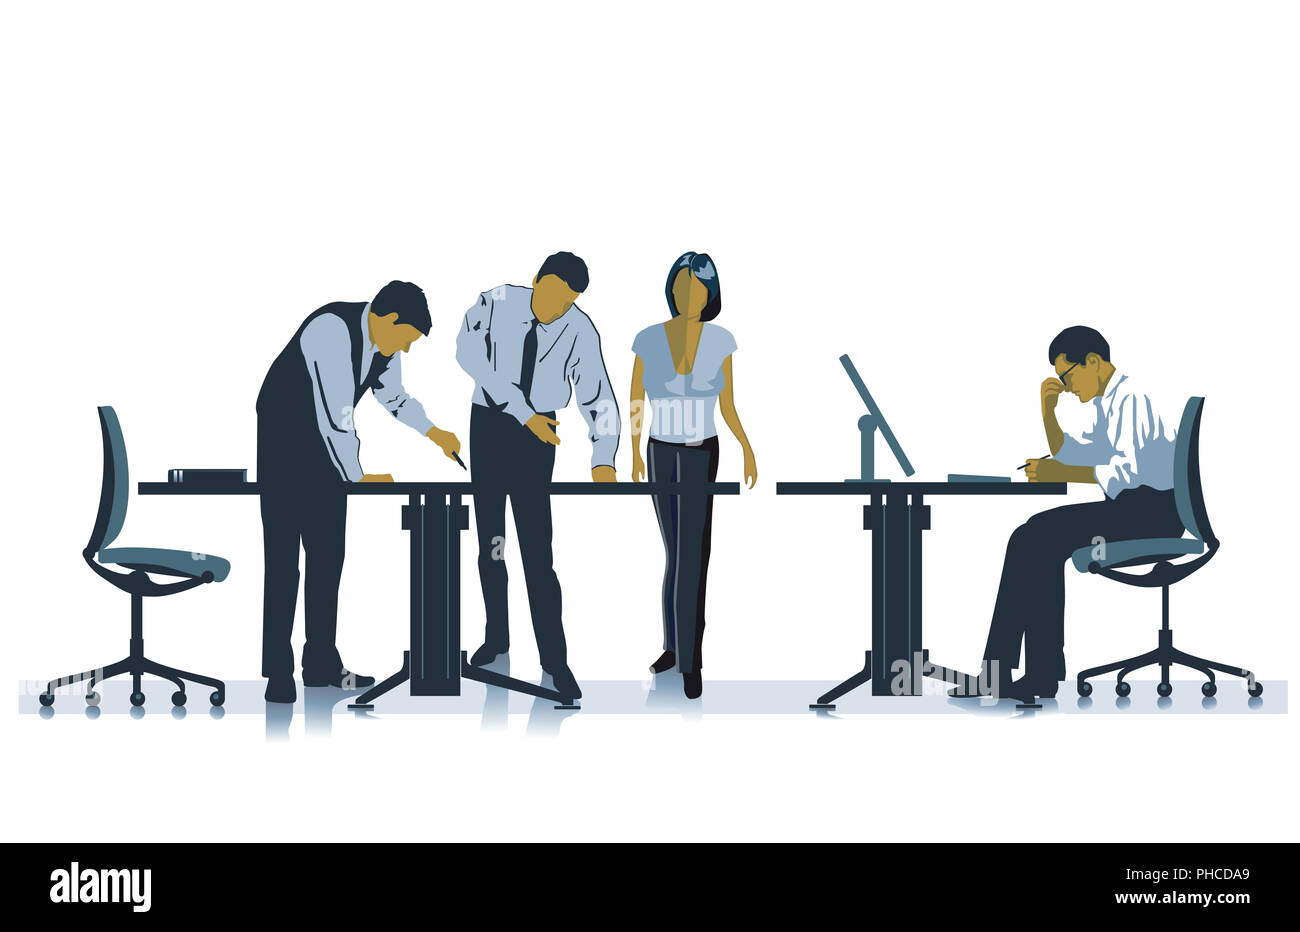 Employees working together in the office Stock Photo